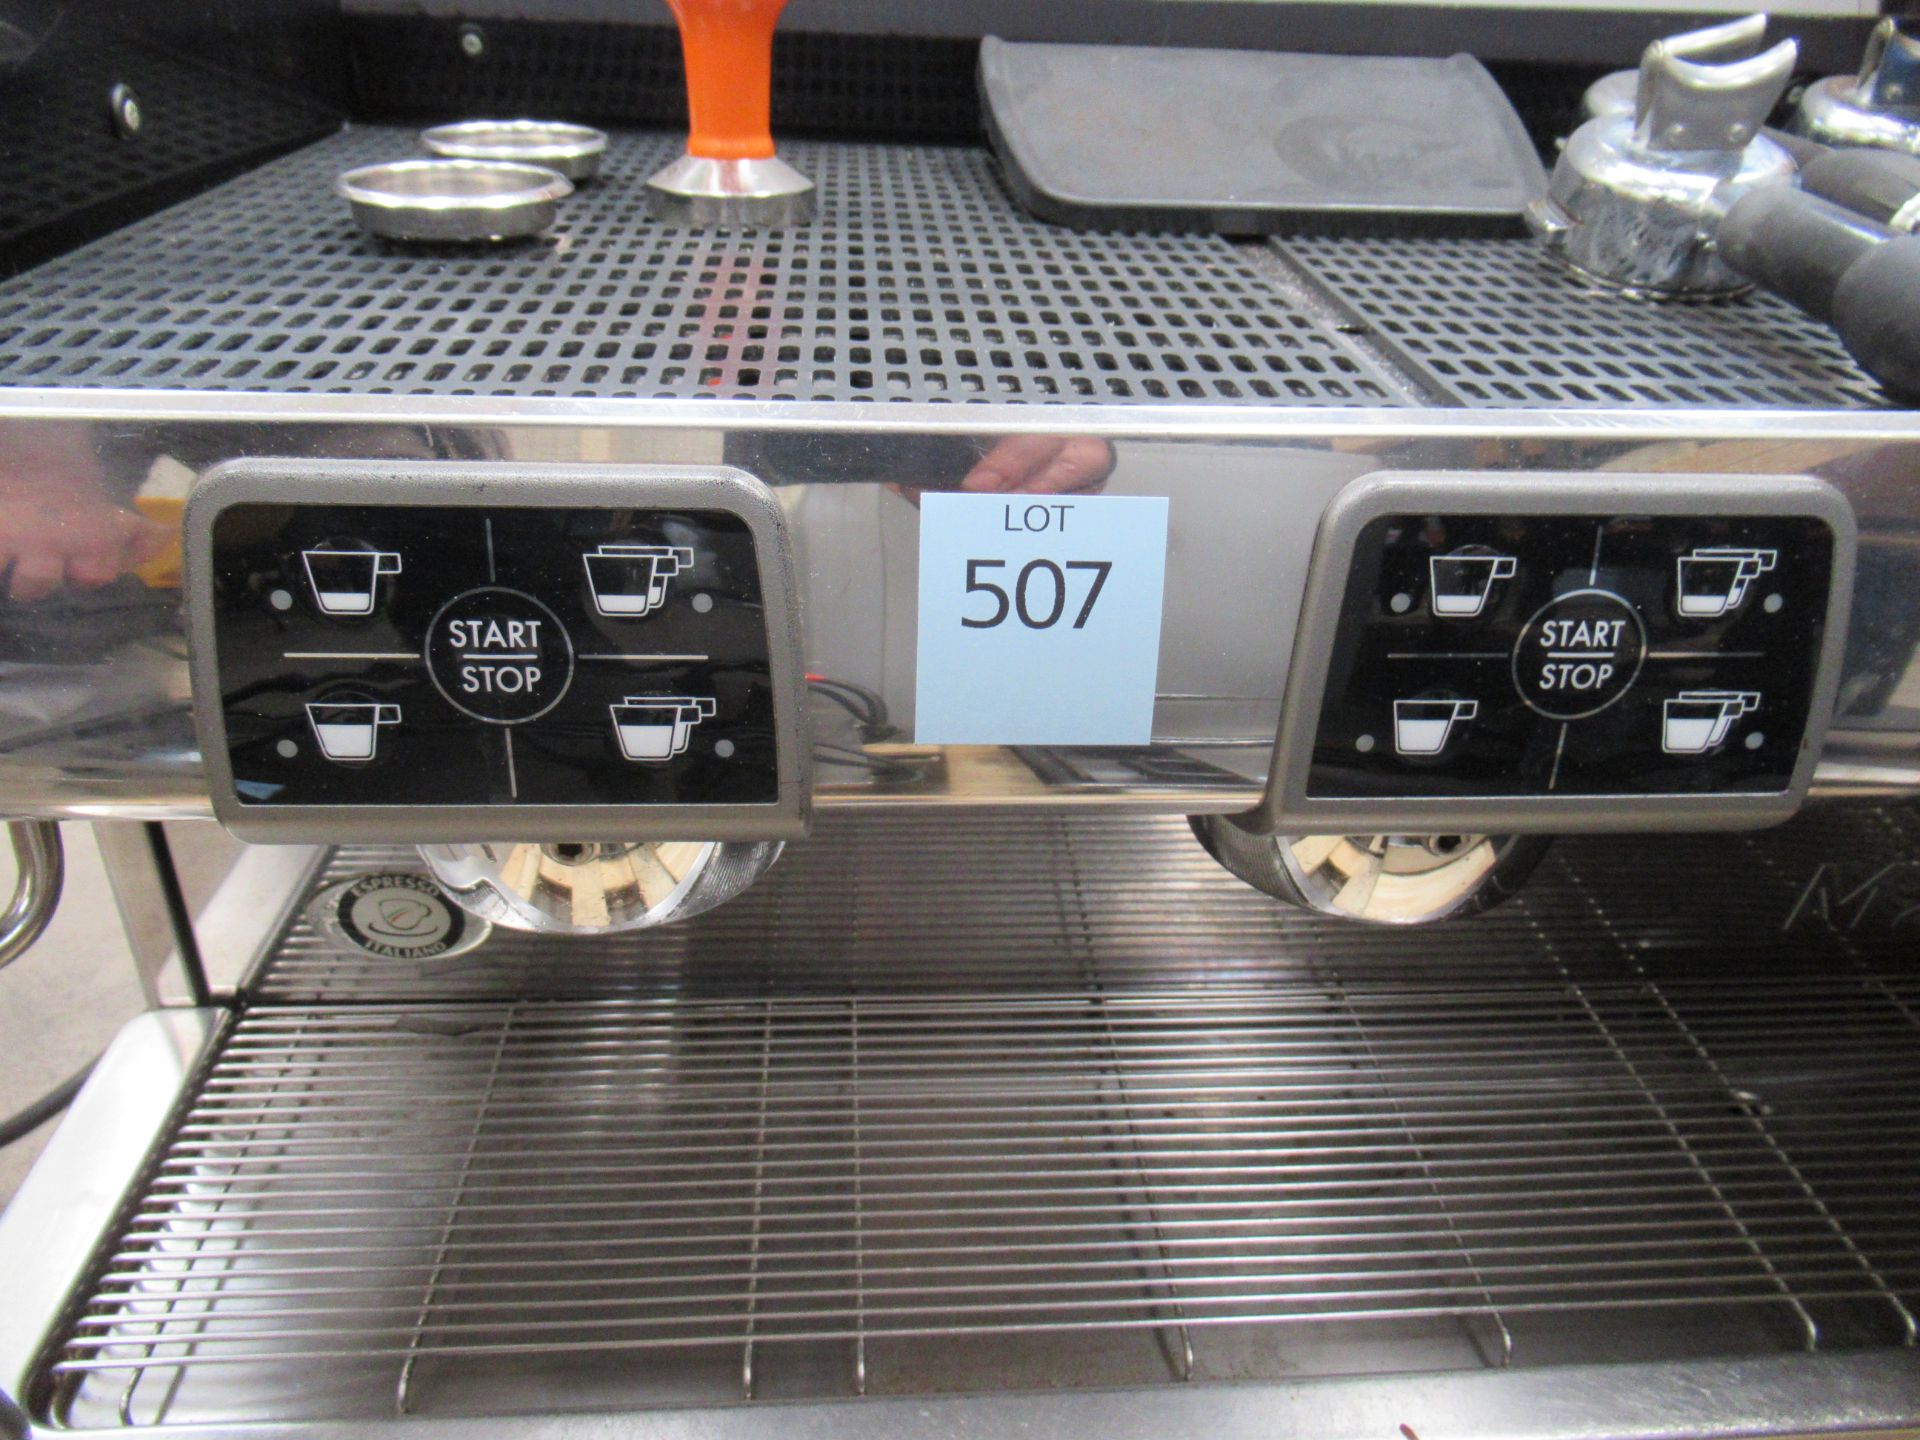 LaCimbali M24 Two Group Commercial Coffee Machine - Image 3 of 8